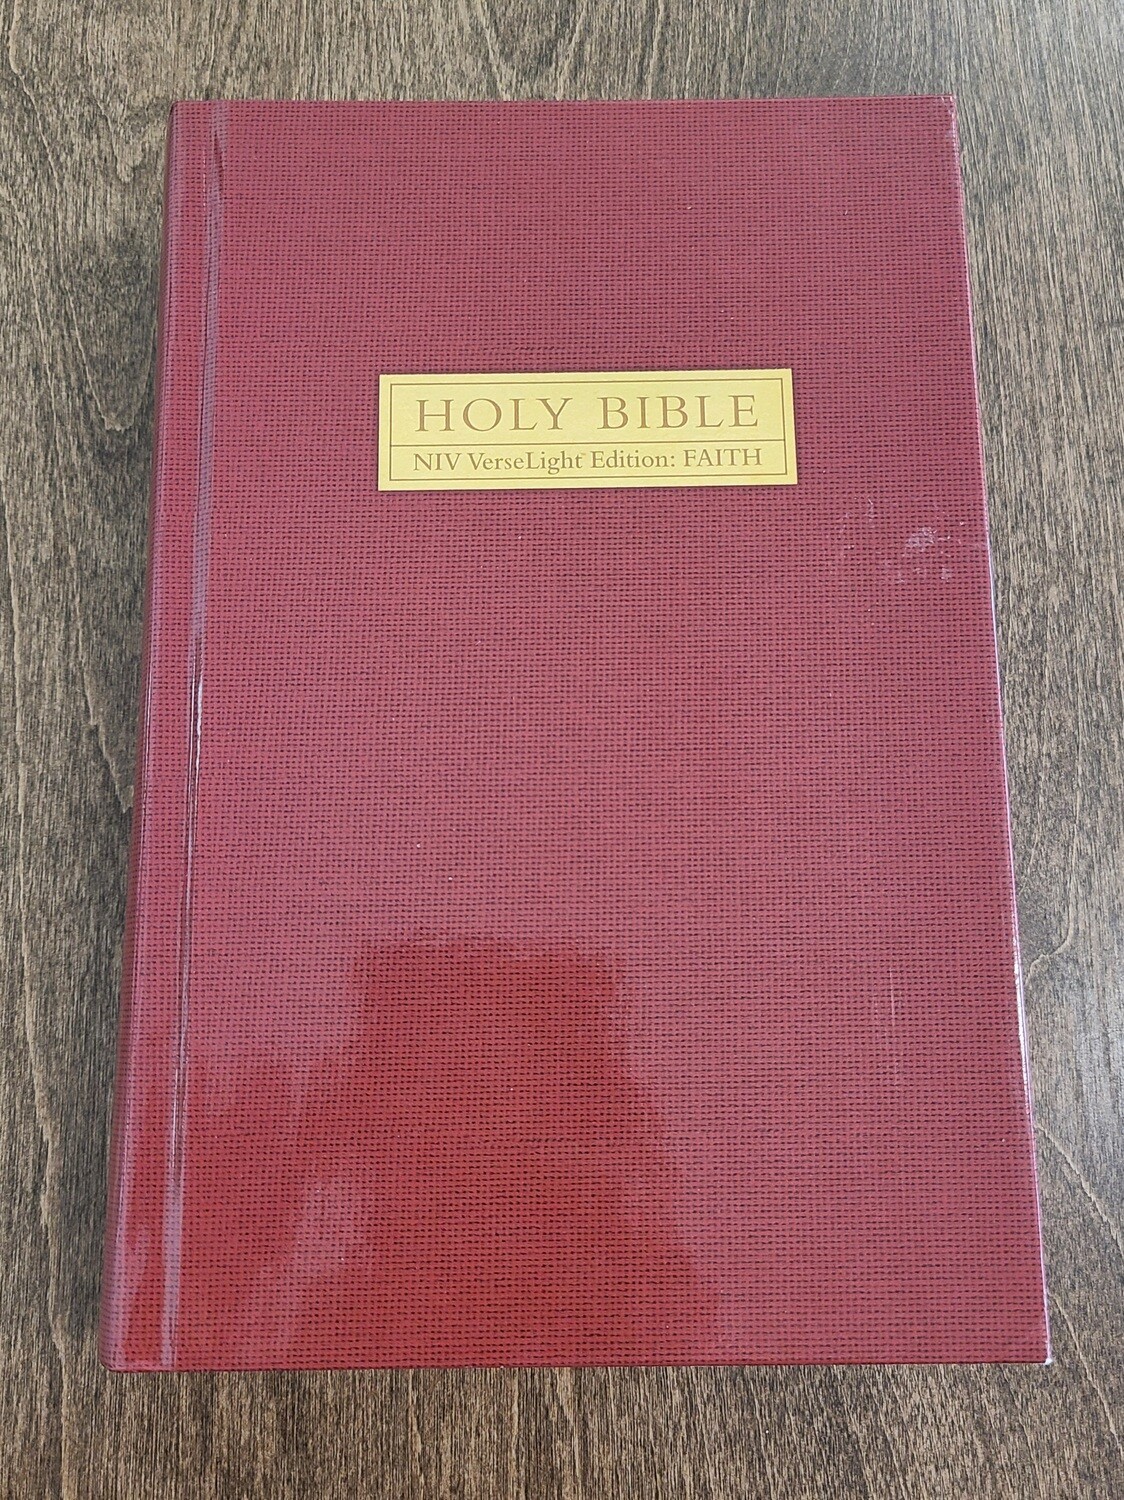 Find Faith Holy Bible - New International Version - Hardcover